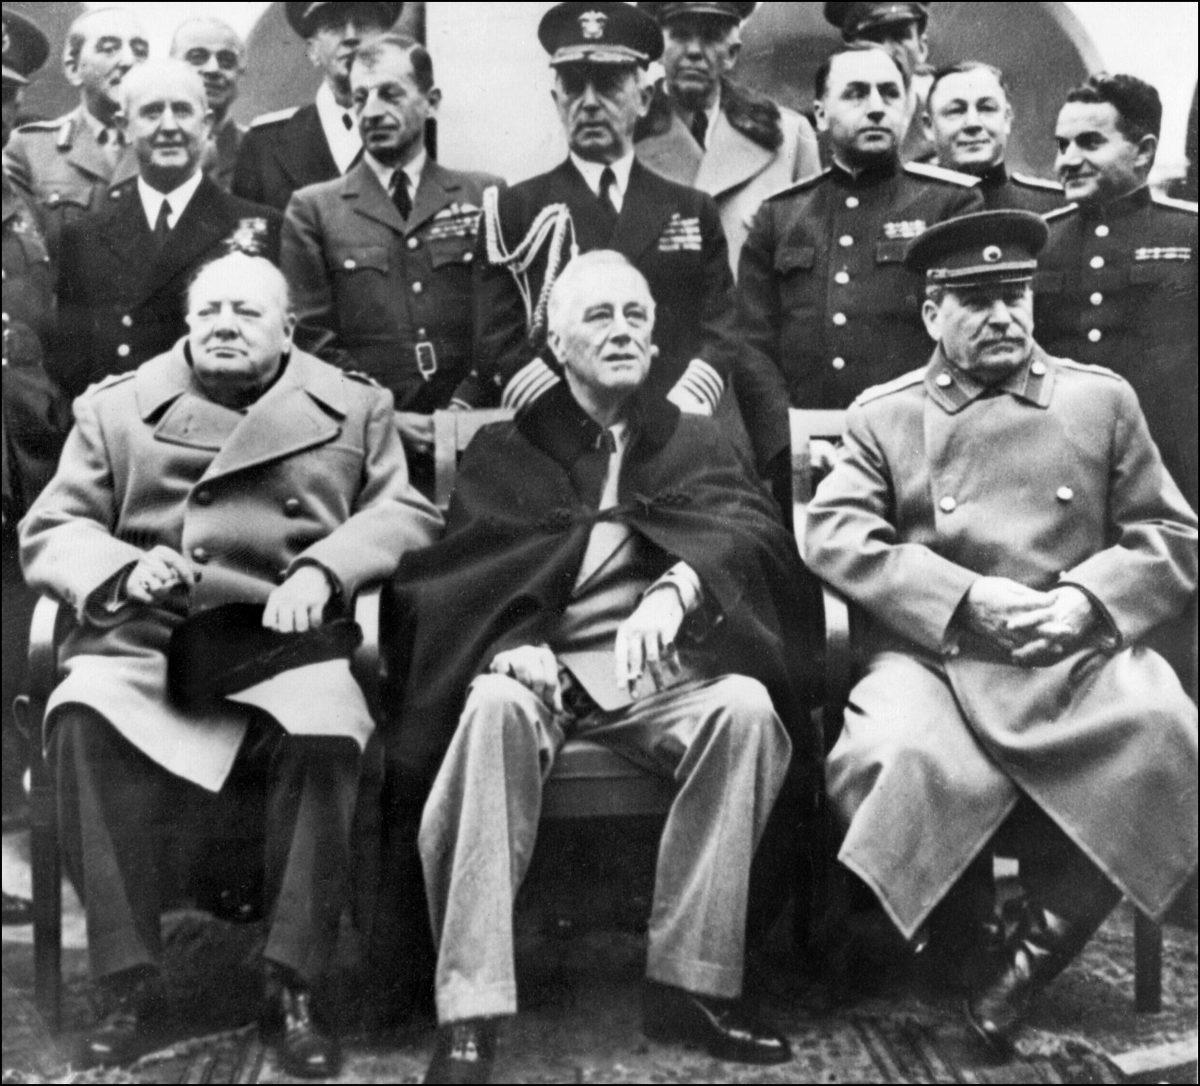 From left to right: British Prime Minister Winston Churchill, U.S President Franklin Delano Roosevelt, and Secretary-general of the Soviet Communist Party Joseph Stalin pose at the start of the Conference of the Allied powers in Yalta, Crimea, on Feb. 4, 1945. (STF/AFP/Getty Images)